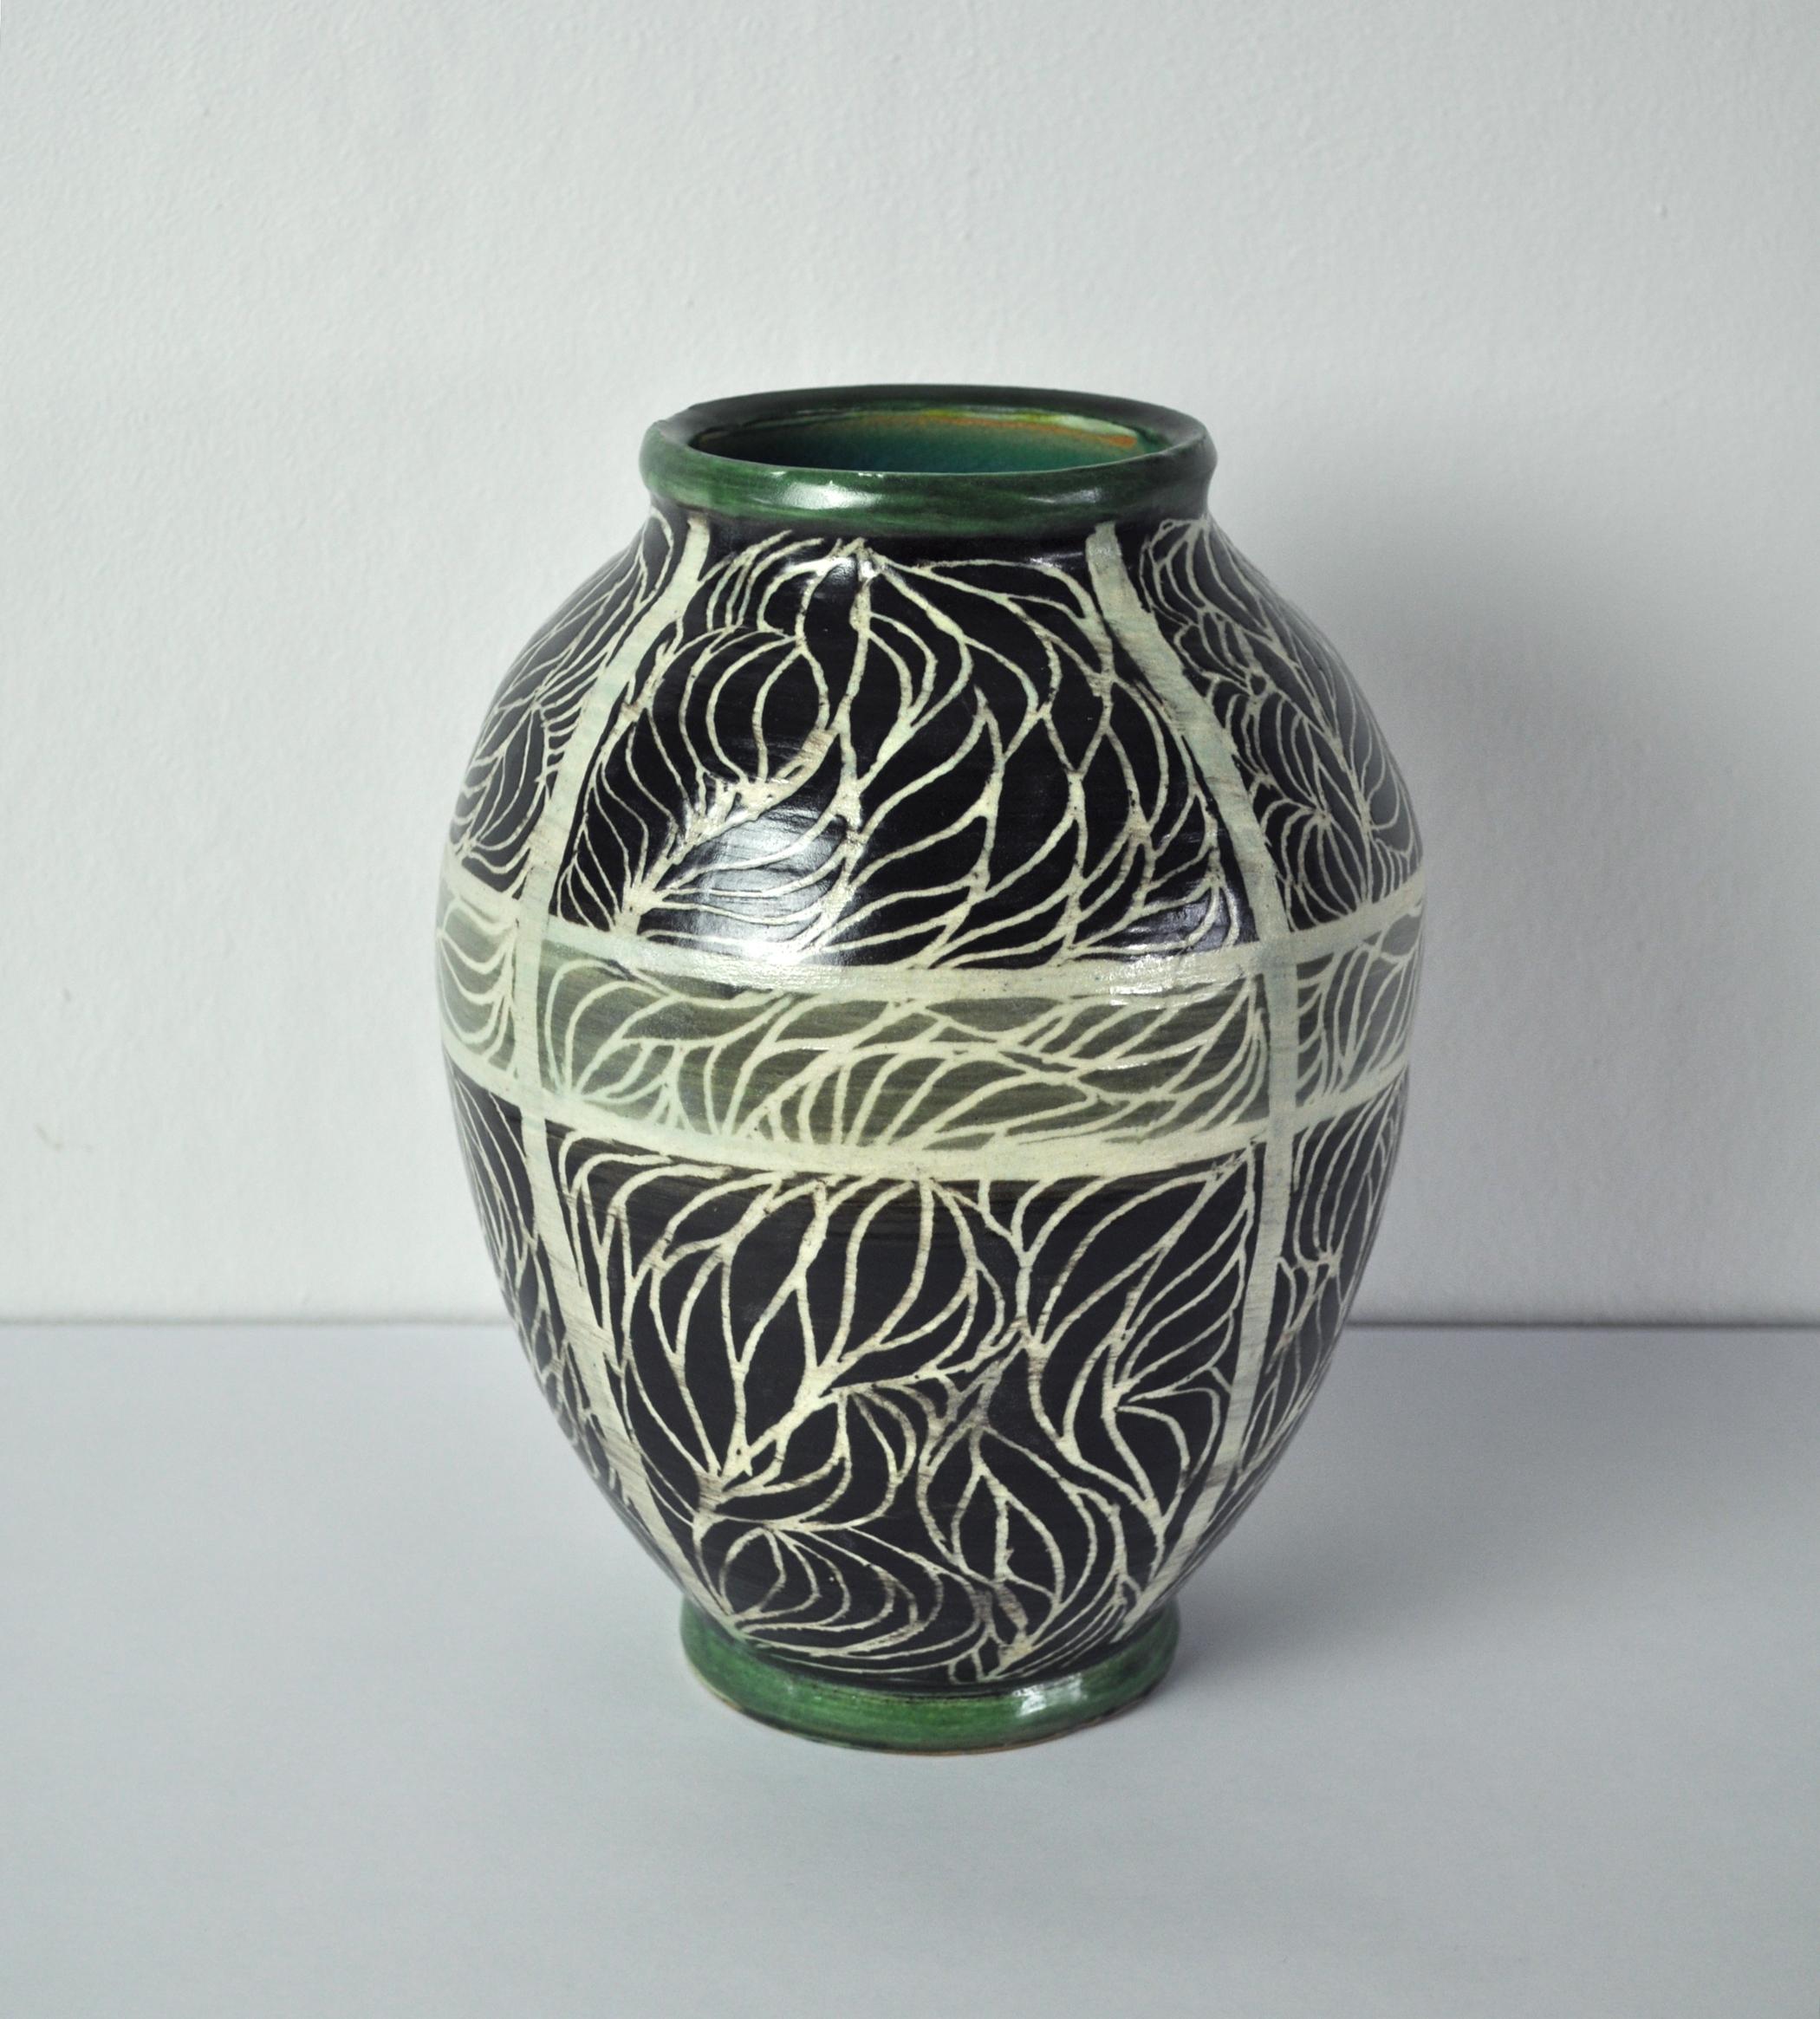 This vase is individually hand-thrown and hand-glazed, entirely unique. 
The artist, Jørgen Søe, is 2nd generation of a Danish family pottery workshop and continues the tradition of this special glaze.
Impressed artist's signature to